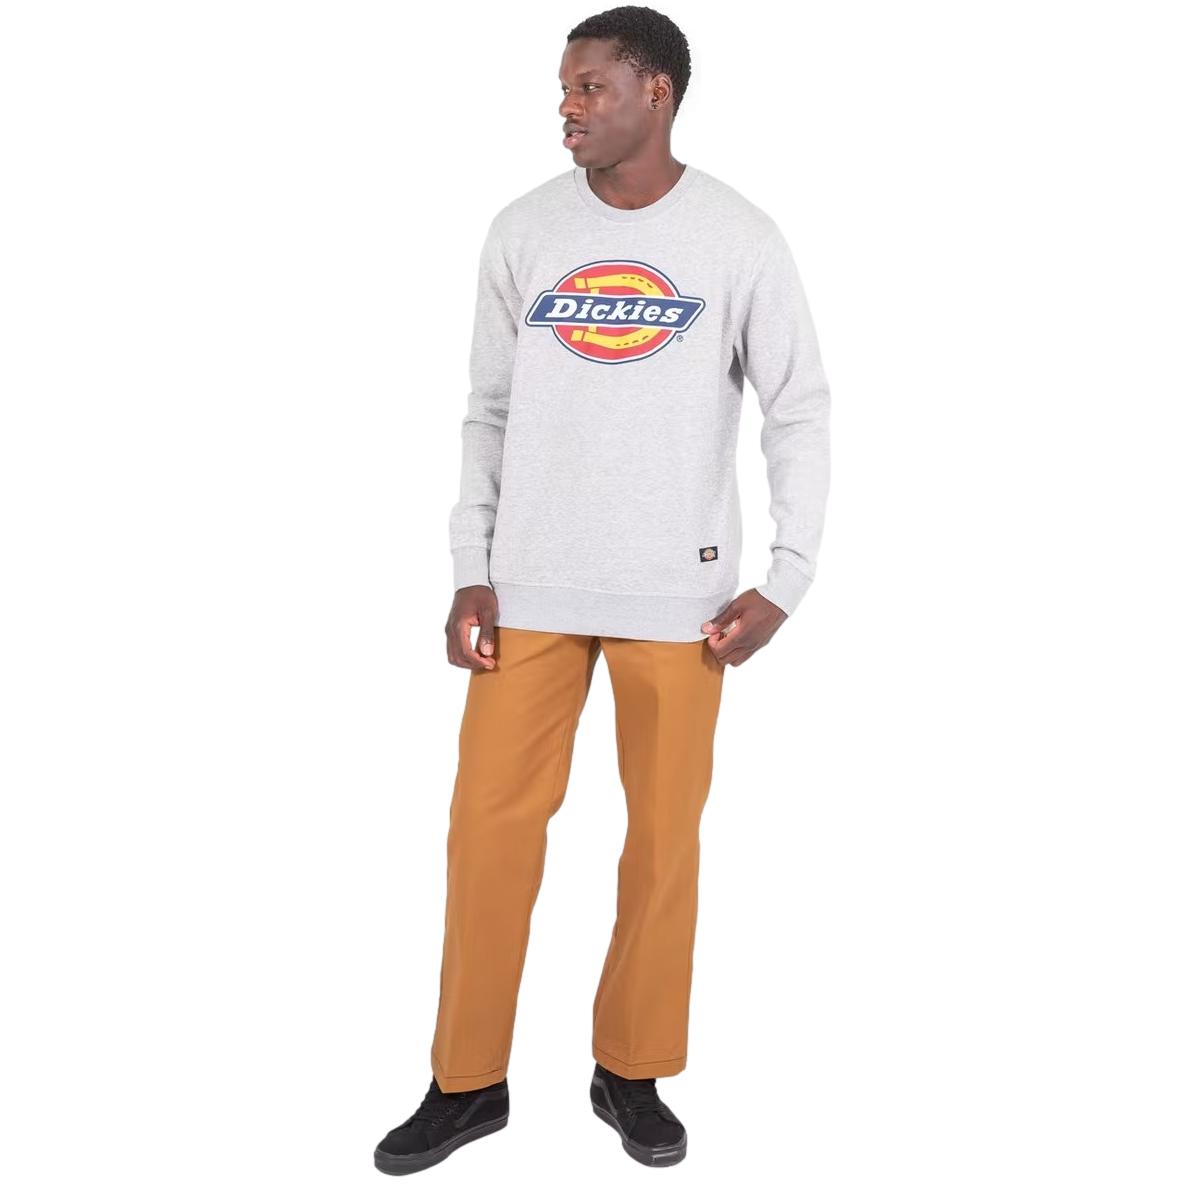 Dickies H.S Classic Crew Neck Sweater Grey Marle